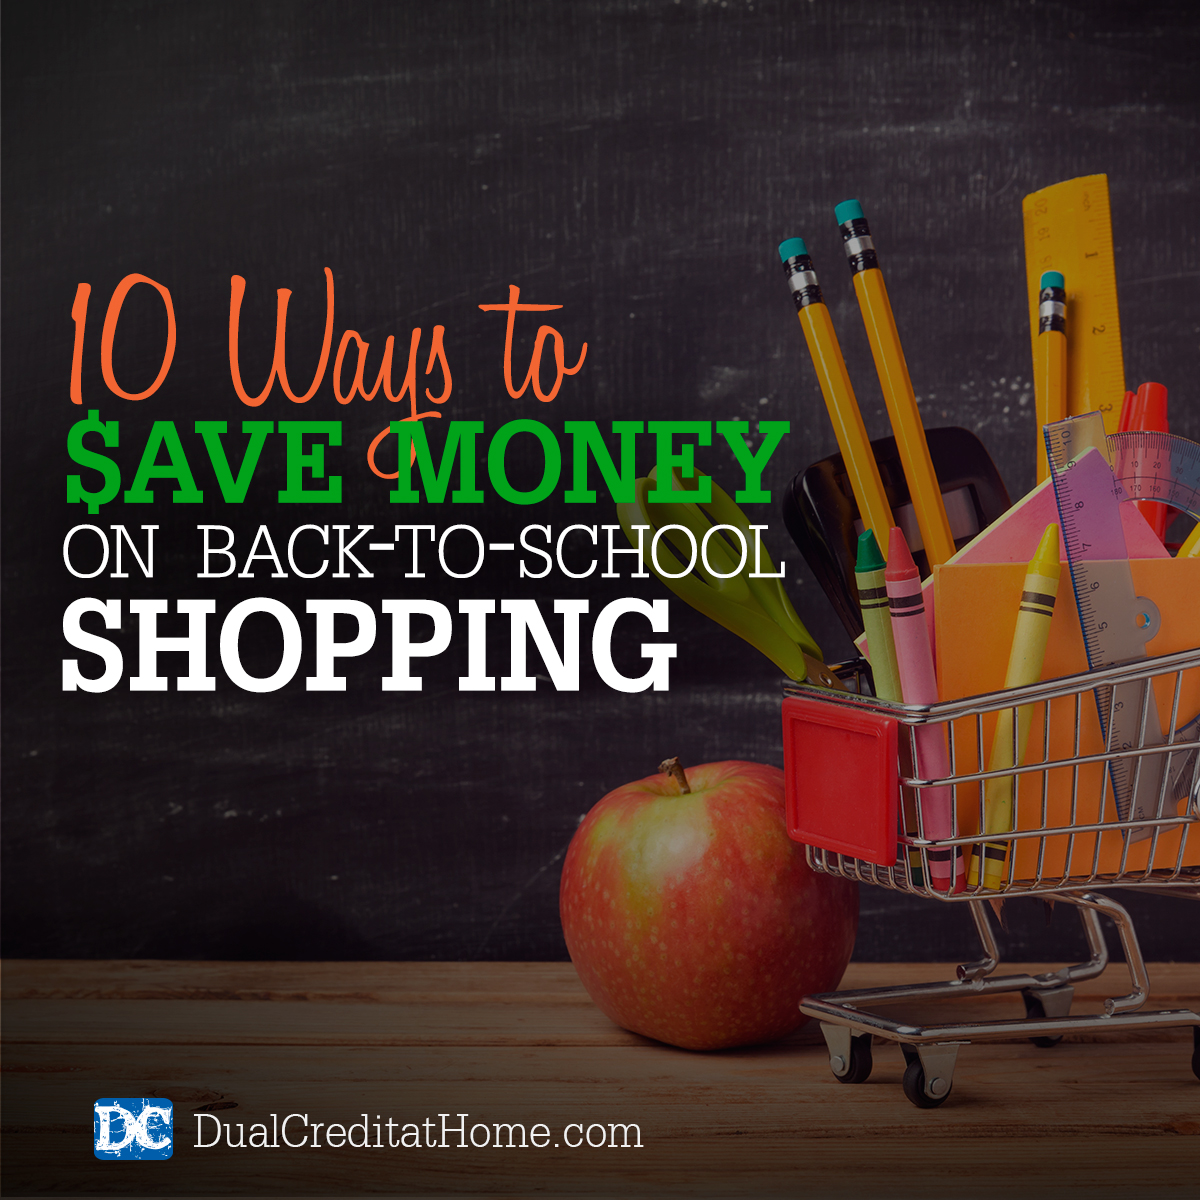 Ten Ways to Save Money on Your Family's Back to School Shopping